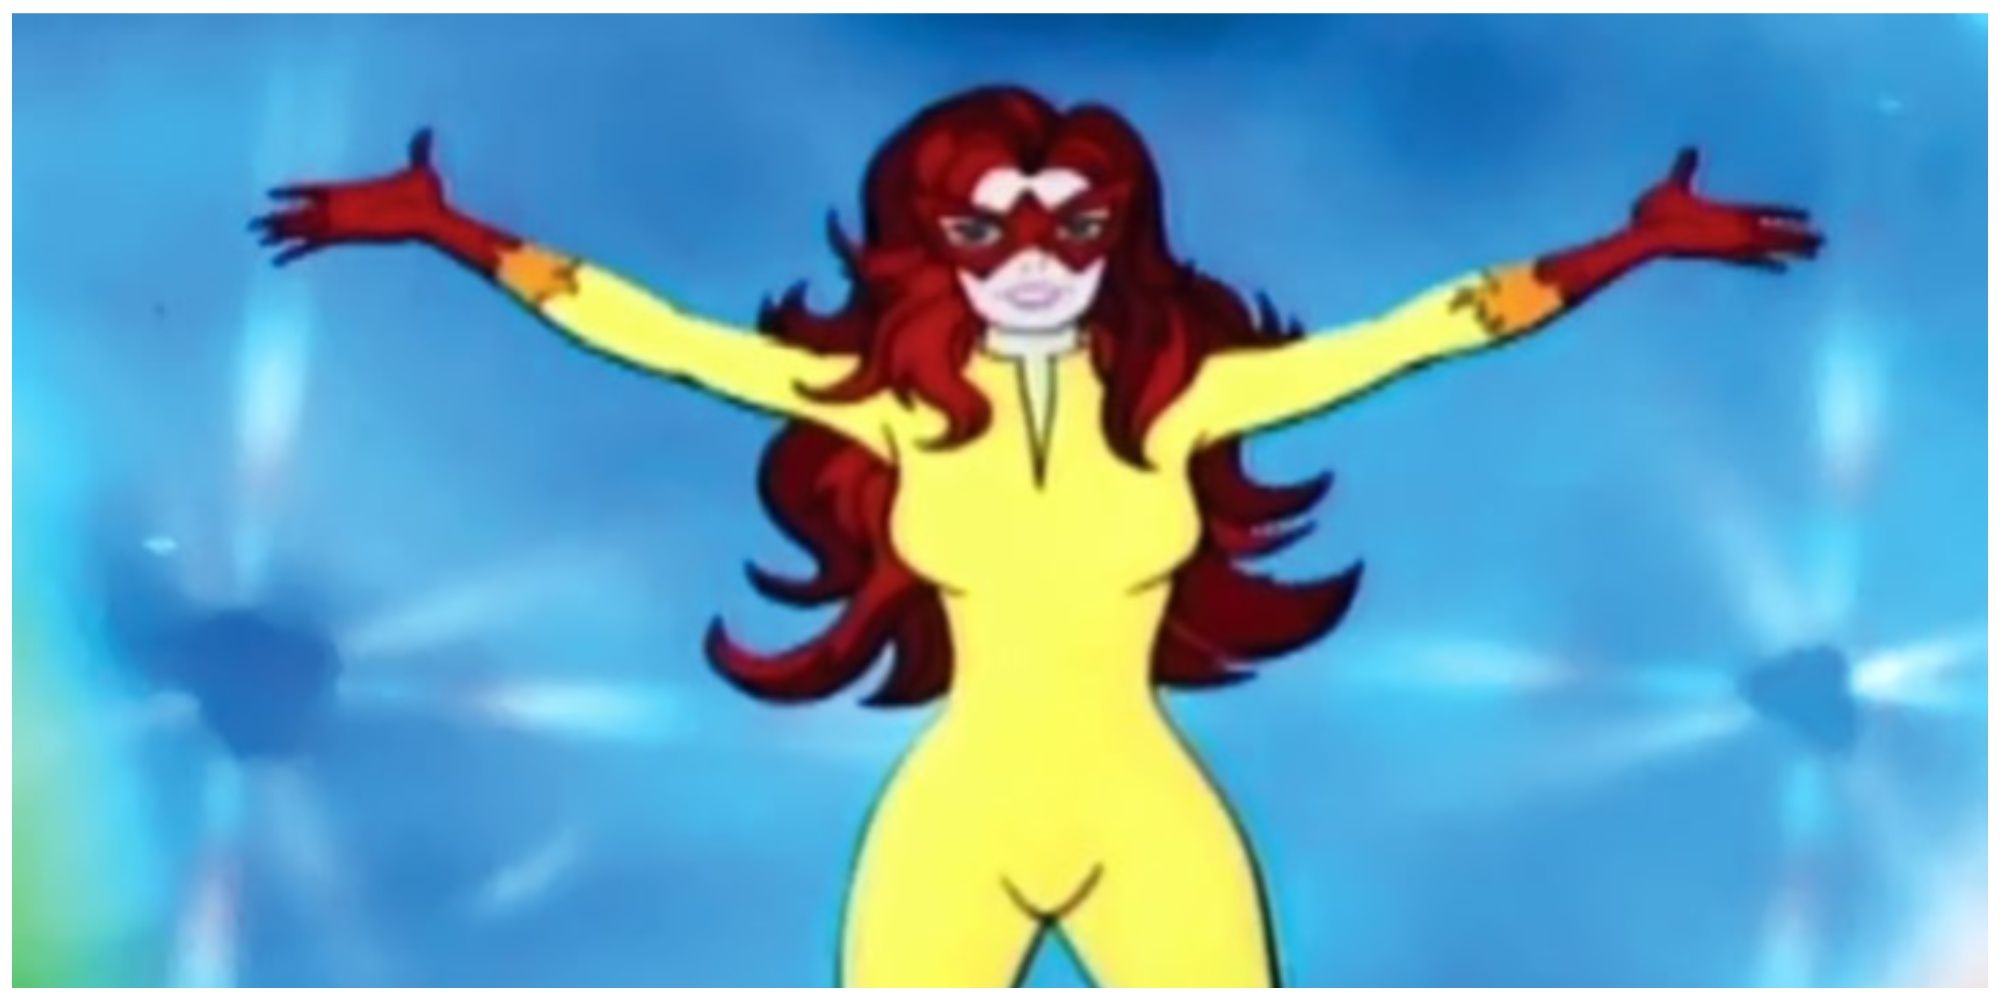 Firestar from Spider-Man and his Amazing Friends